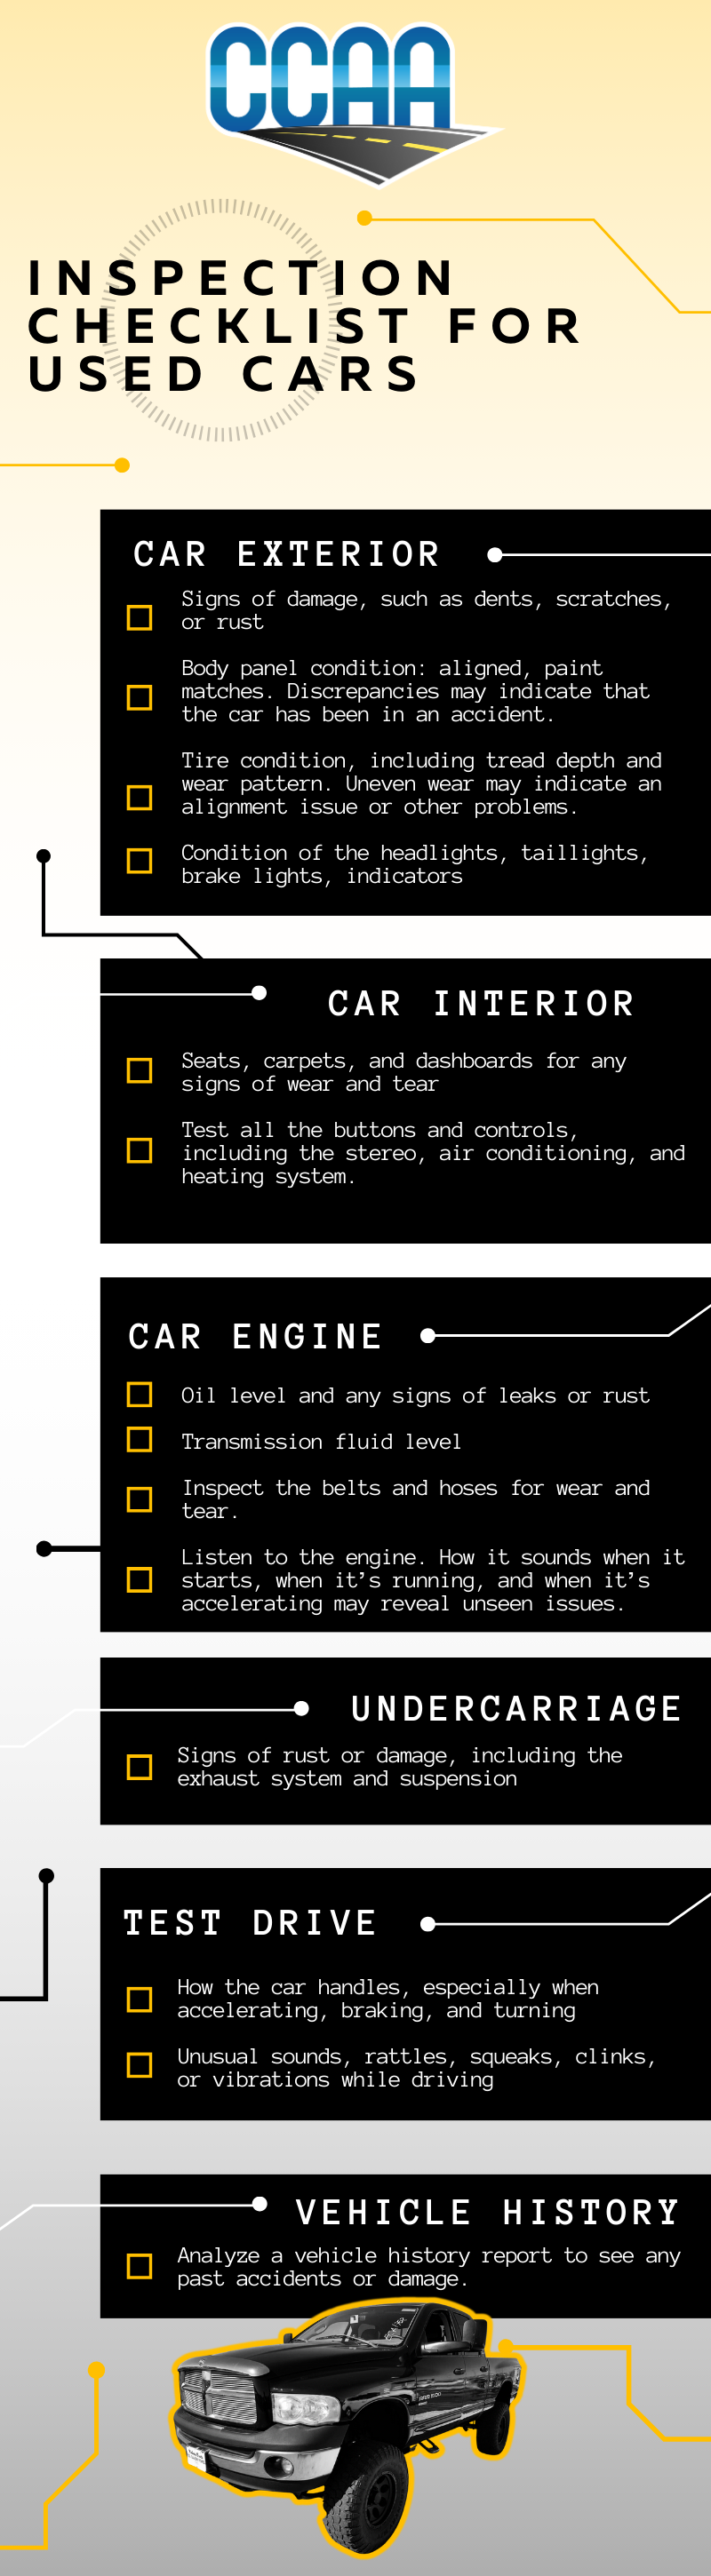 An infographic checklist when you inspect a used car at auction.